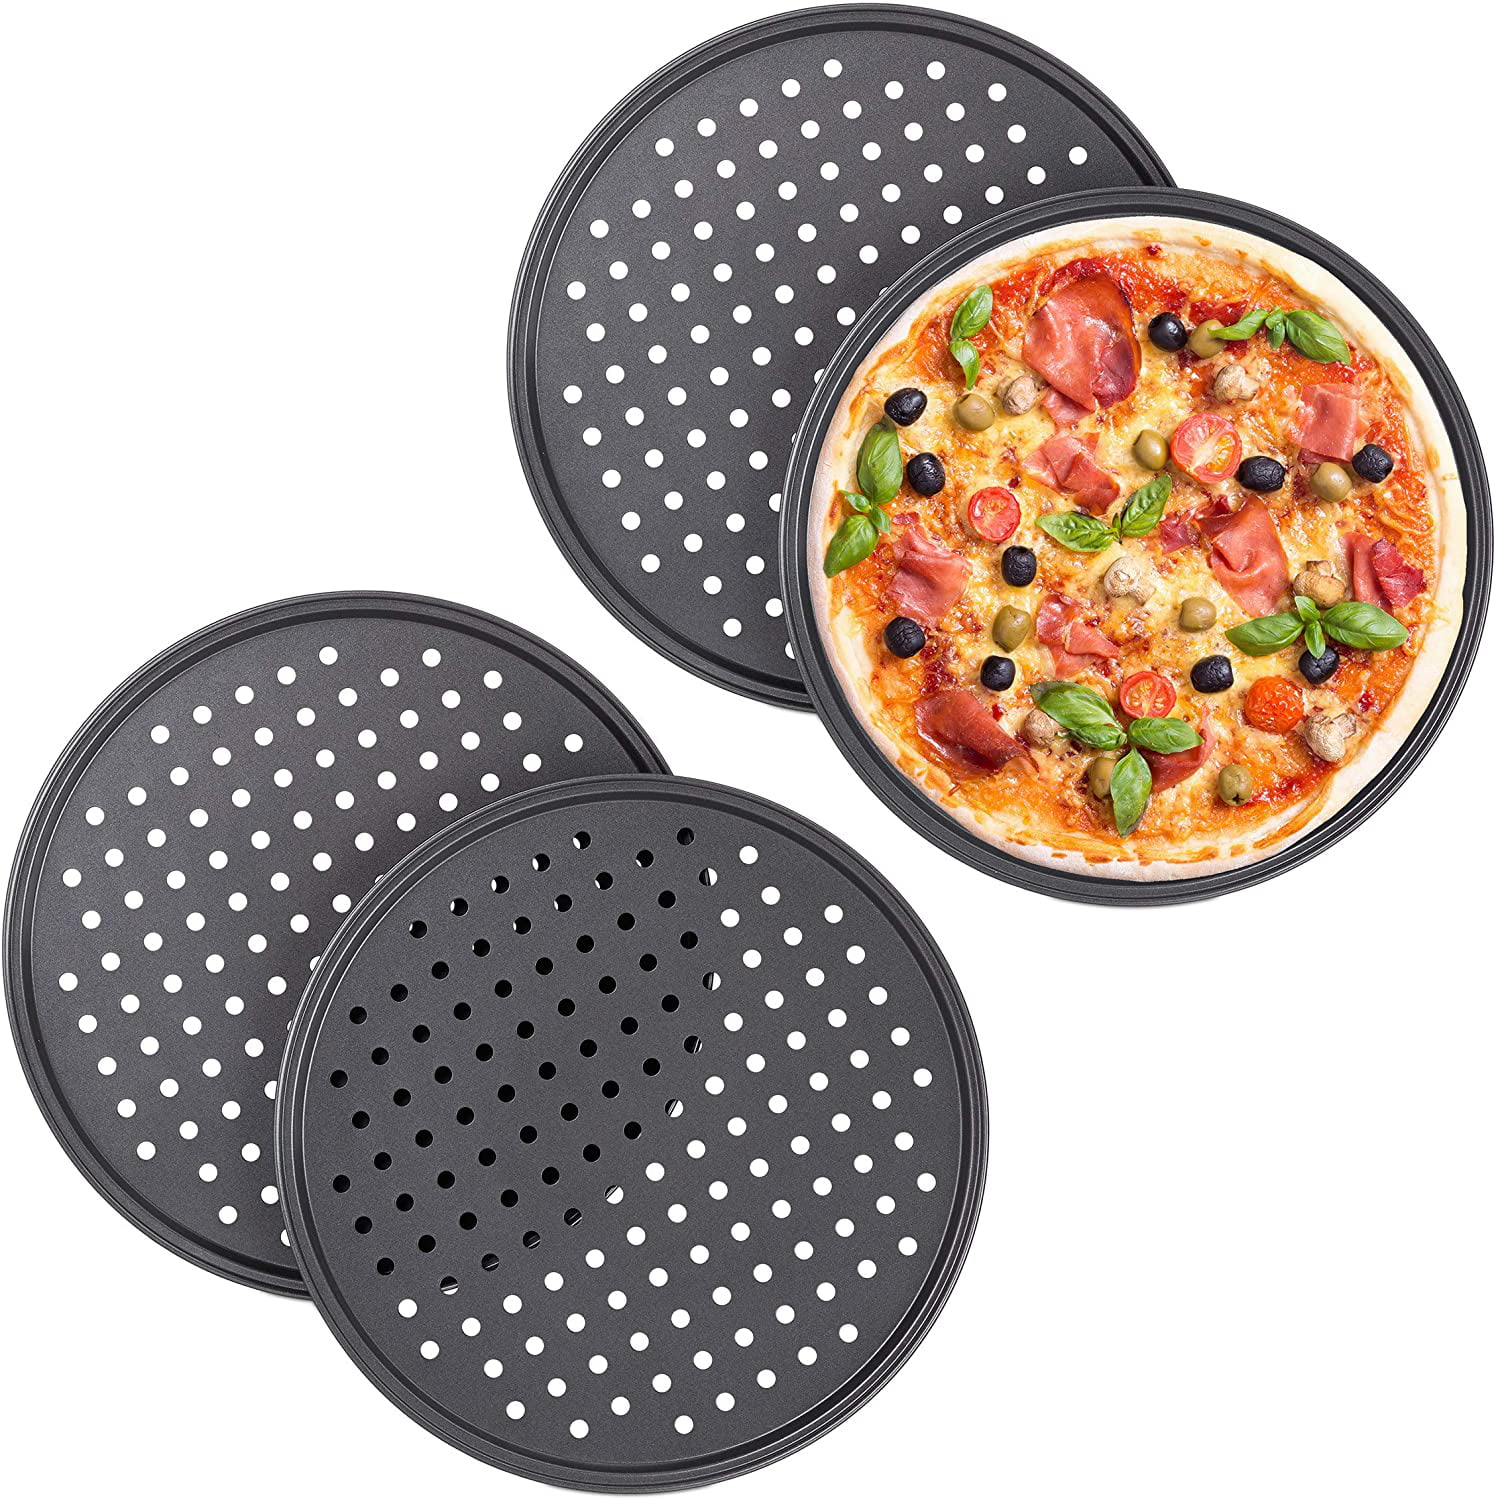 Round Pizza Baking Pan Pizza Plate Perforated Oven Safe Bakeware 9 inch 